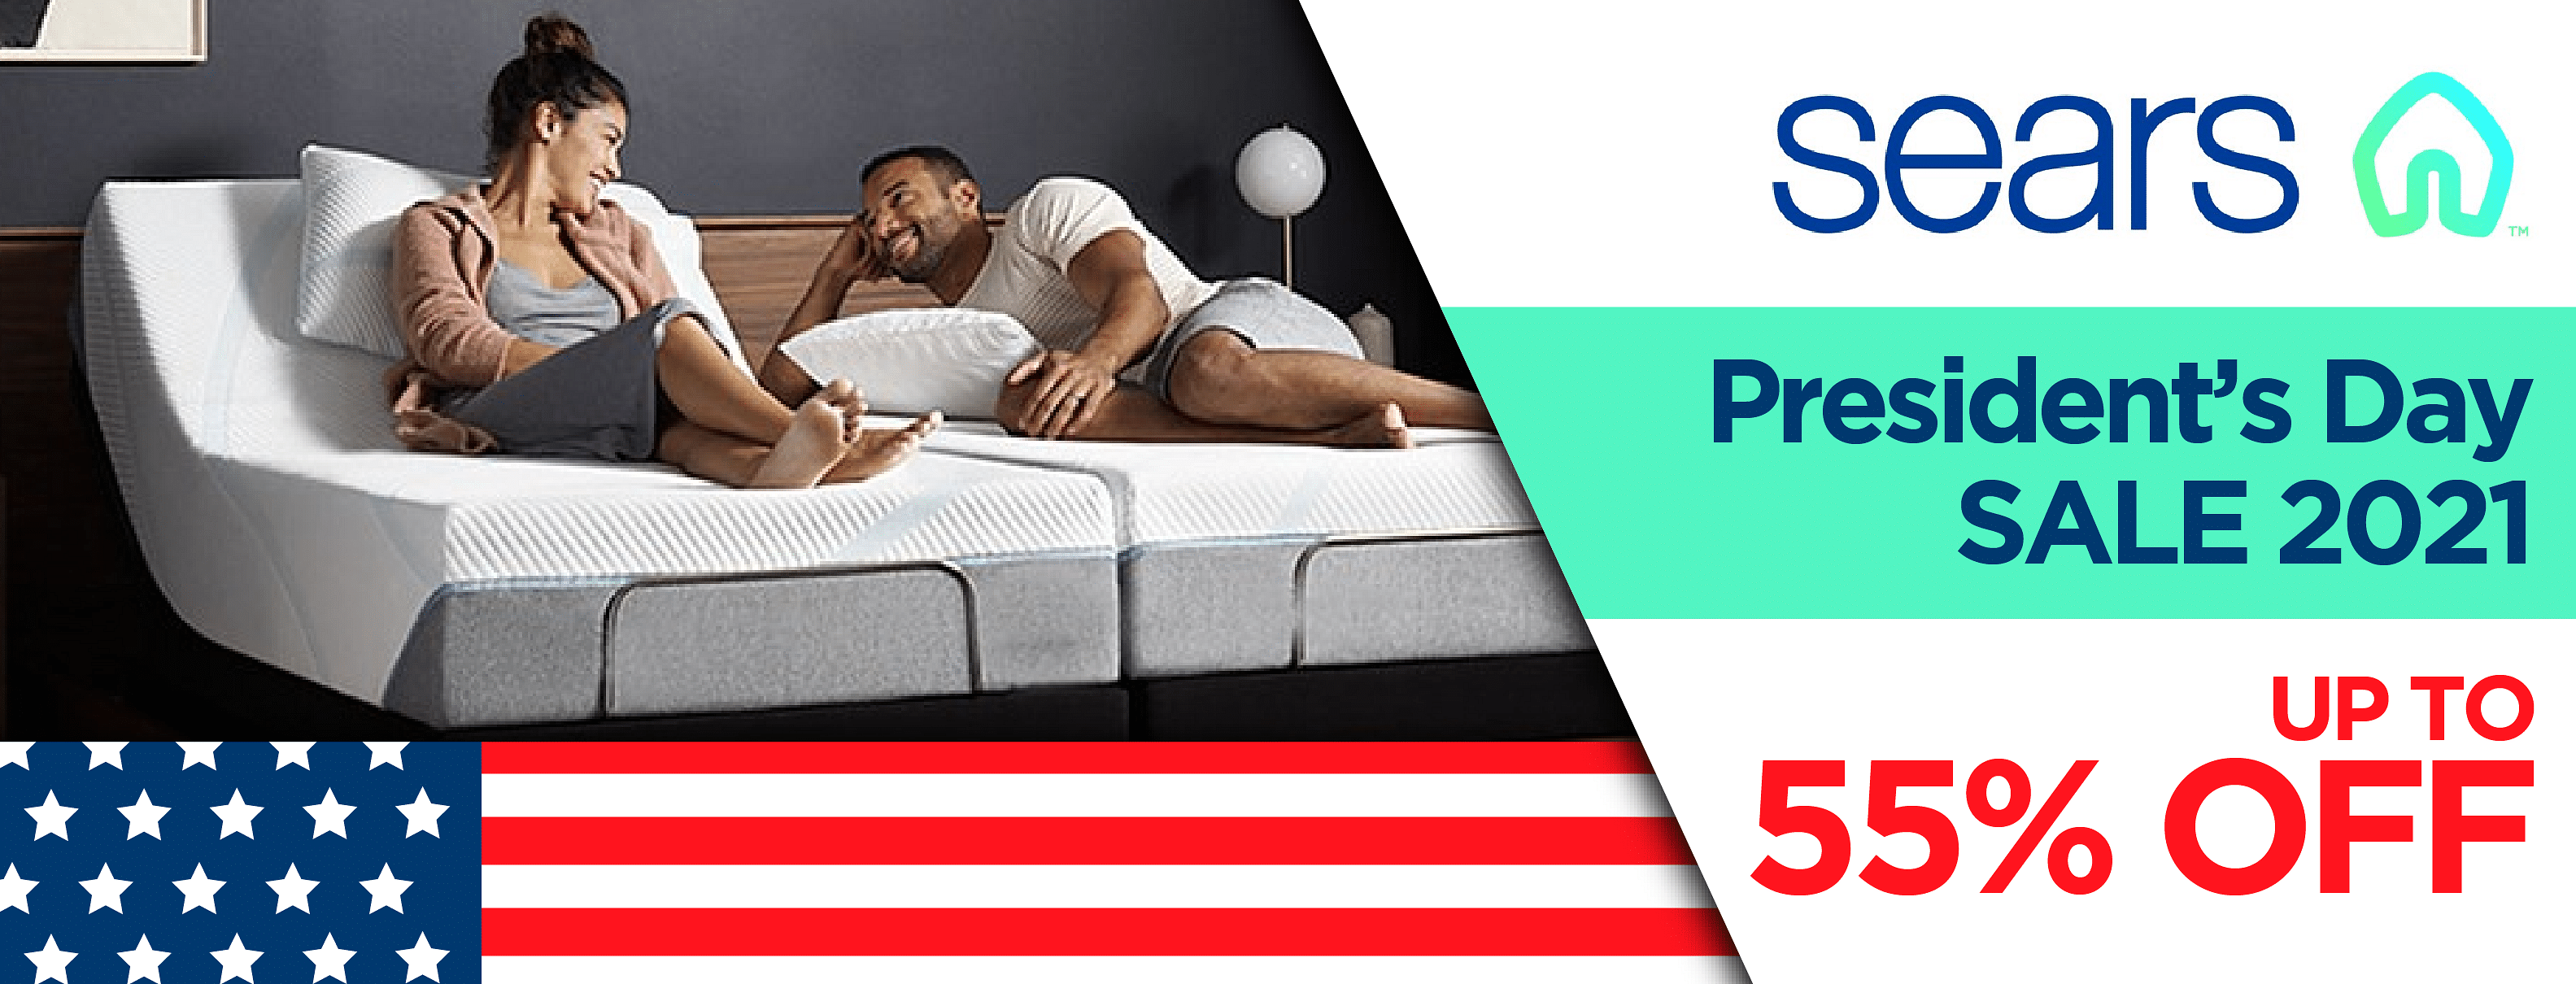 sears presidents day sale mattress coupons